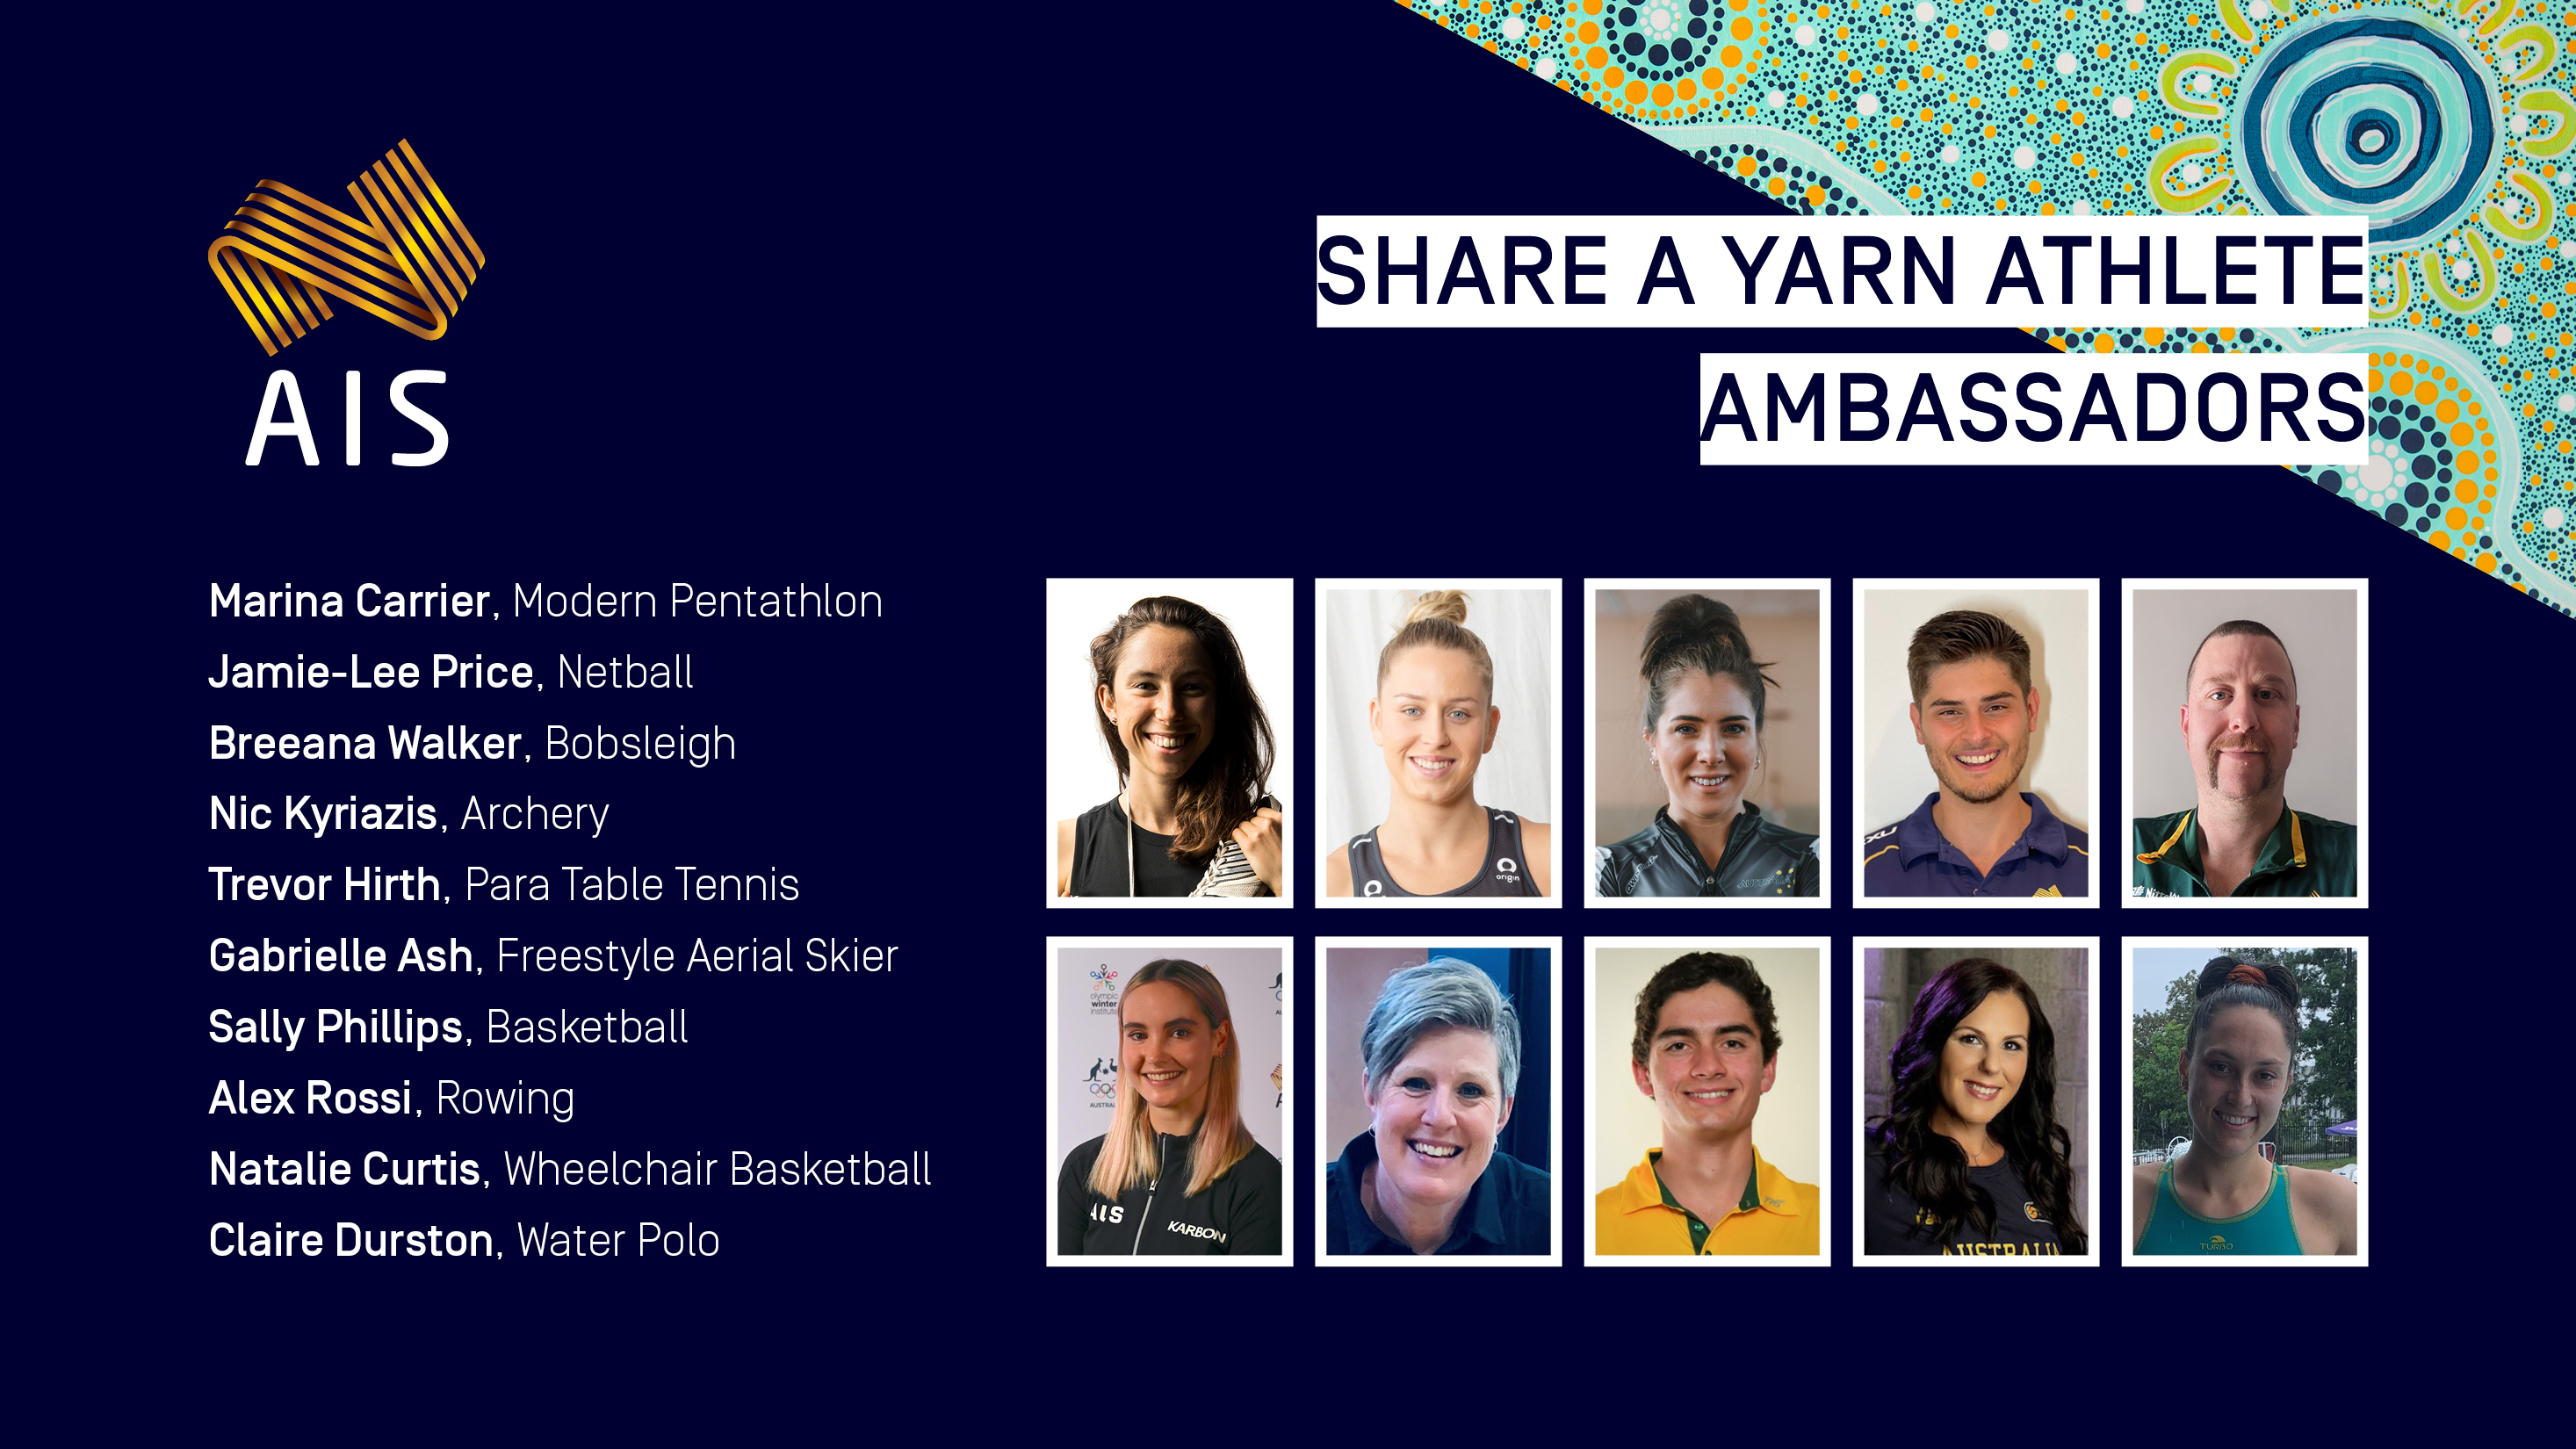 Share a Yarn has appointed 10 athlete ambassadors